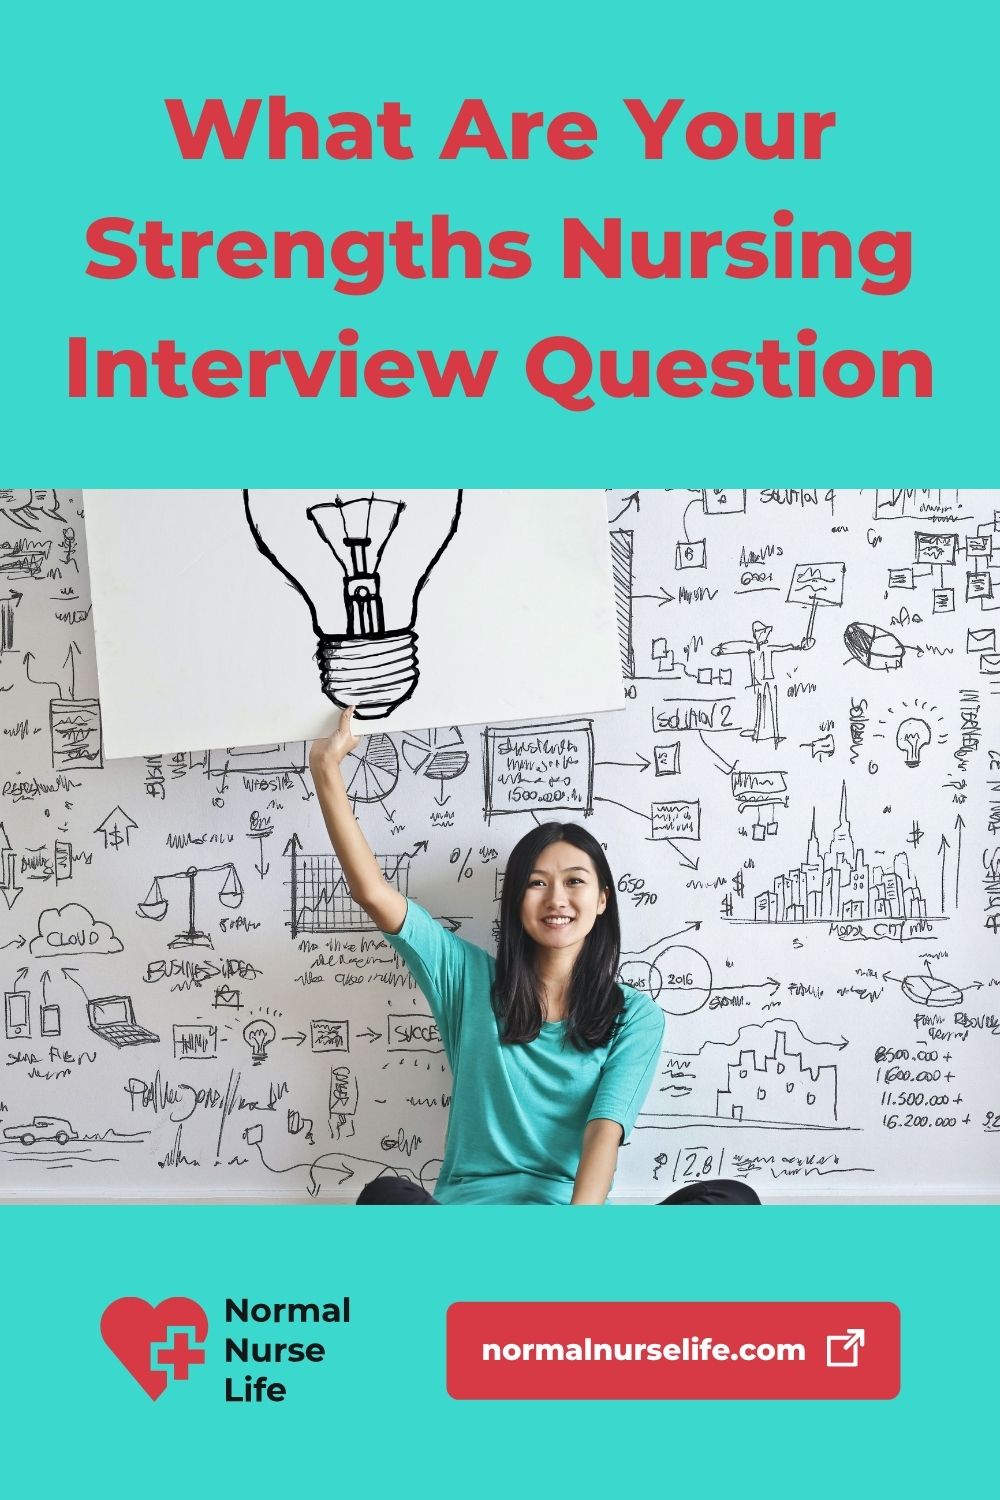 What are your strengths nursing interview question